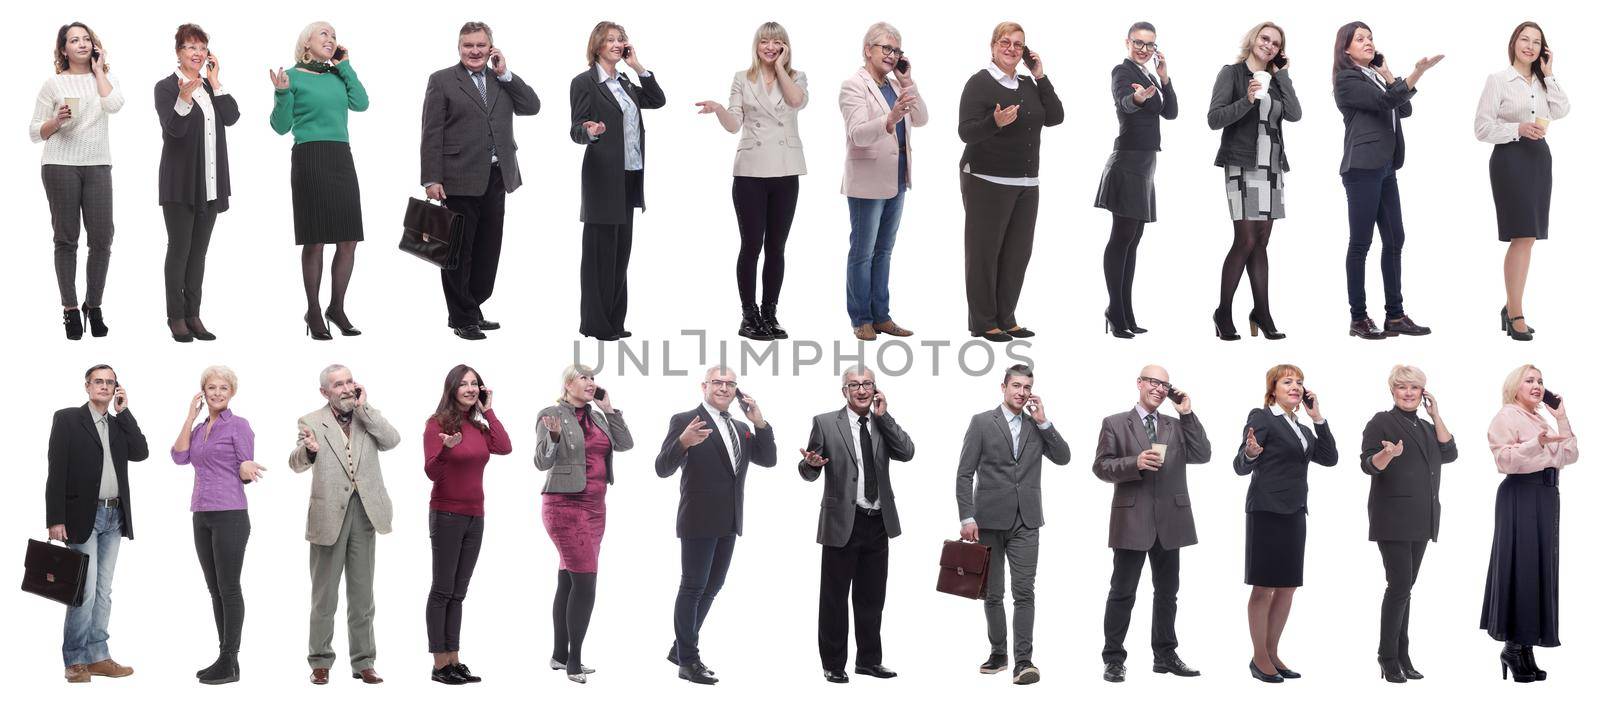 group of people holding phone in hand isolated on white background